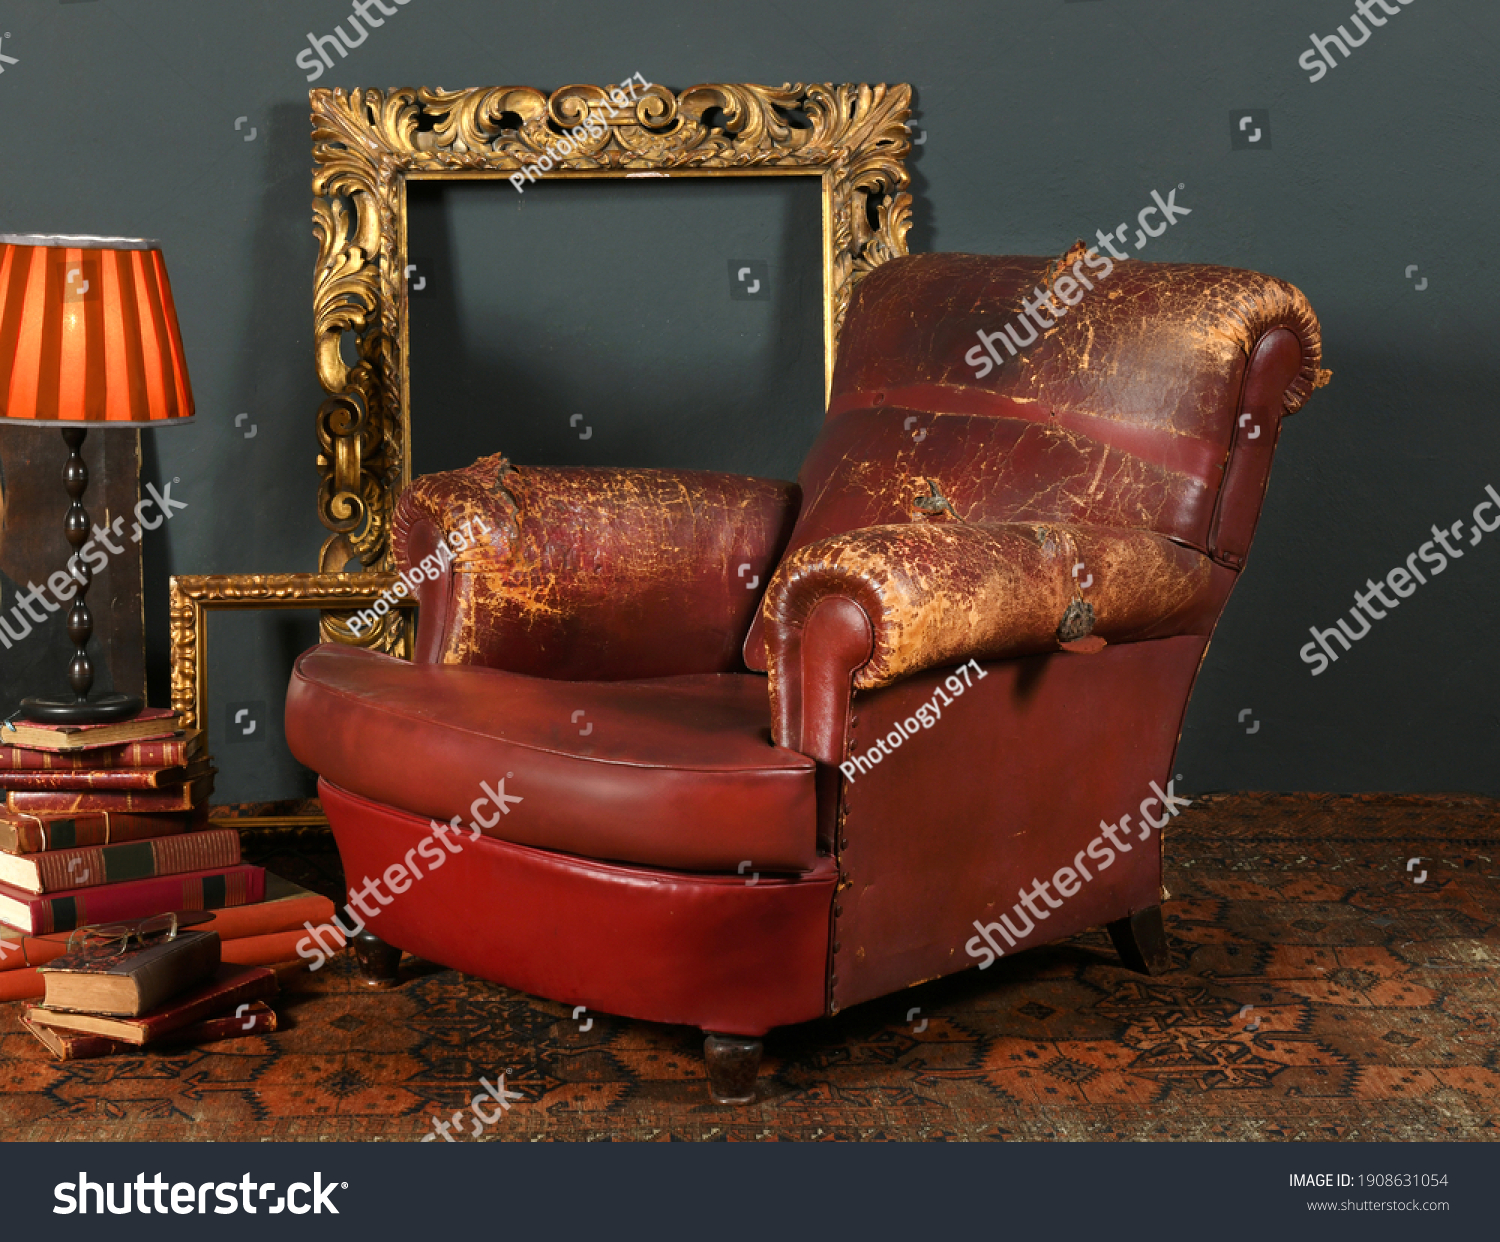 Old shabby red leather armchair placed near vintage decorative frames and lamp in room with retro style interior #1908631054